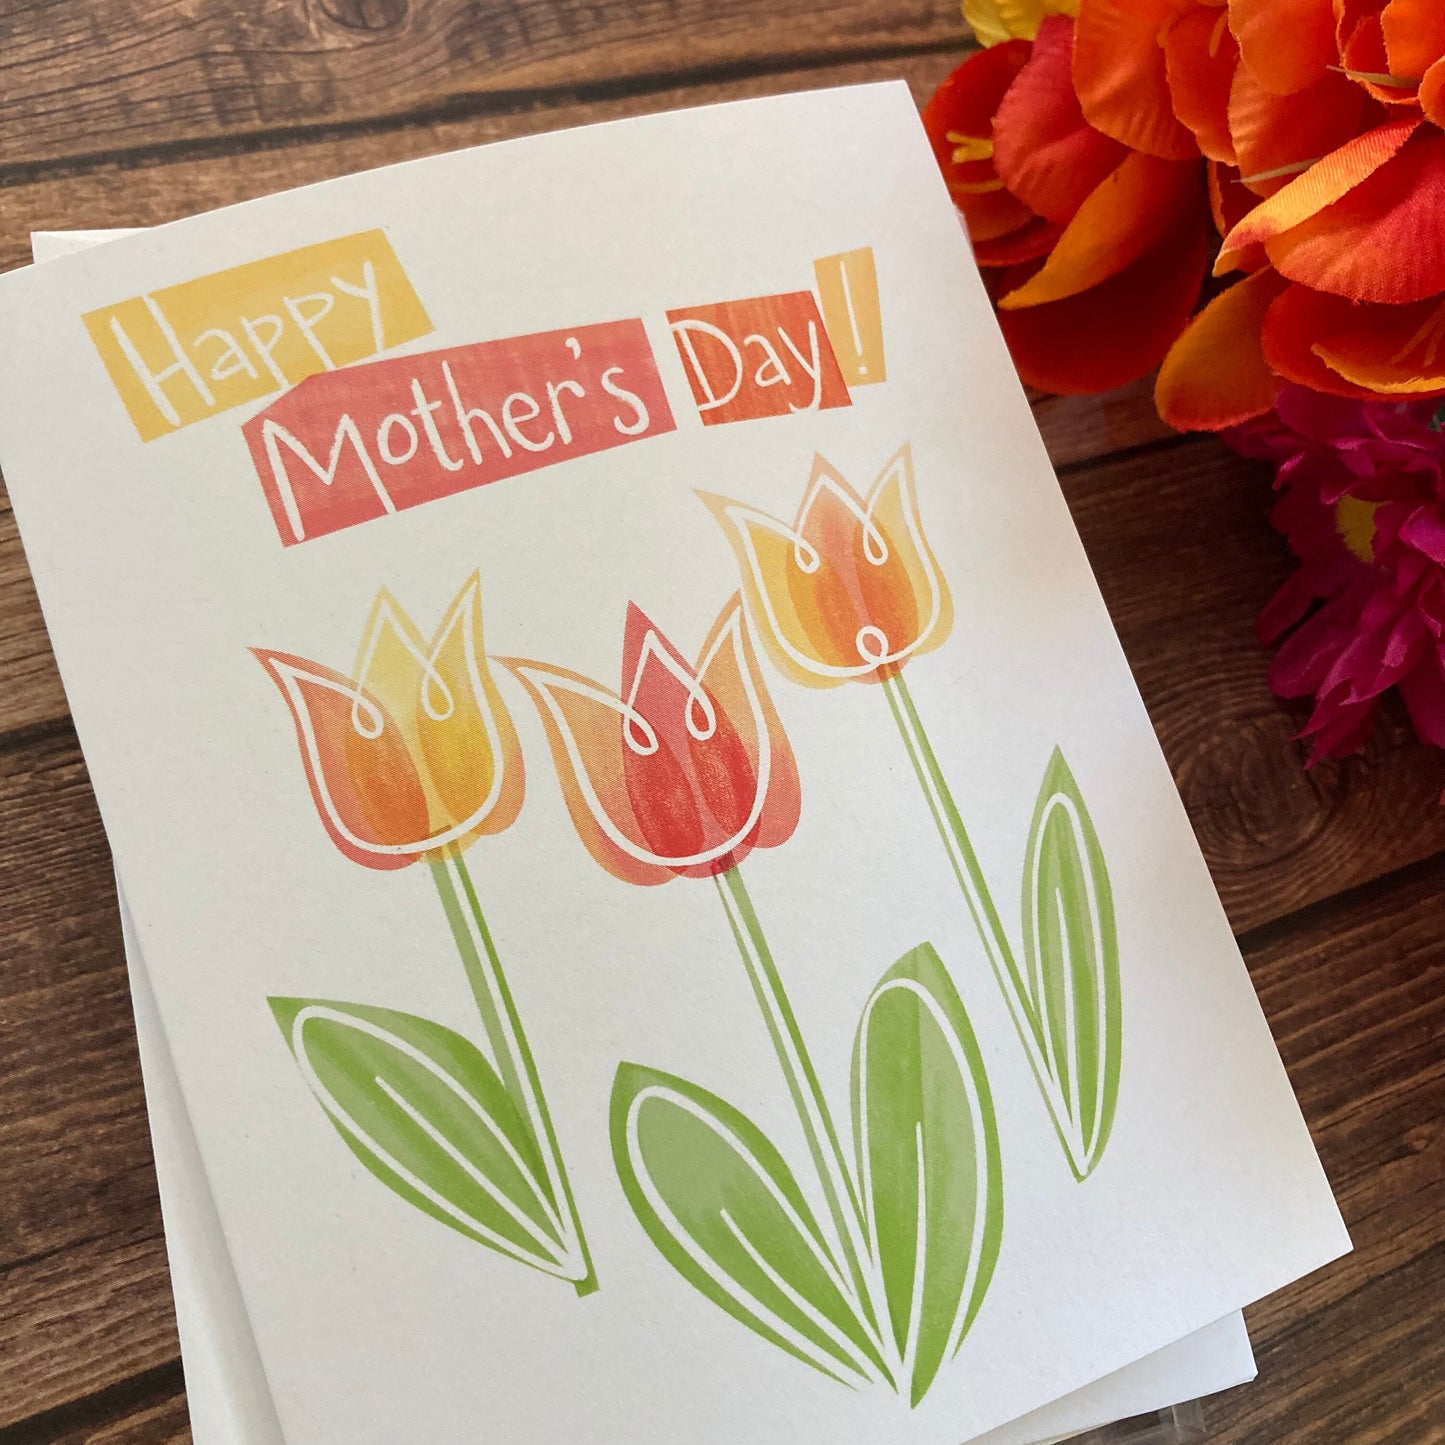 MOTHER - Happy Mother's Day! - Simply beautiful, minimalist Eco-Friendly Notecards by Adriana Bergstrom (Adriprints)